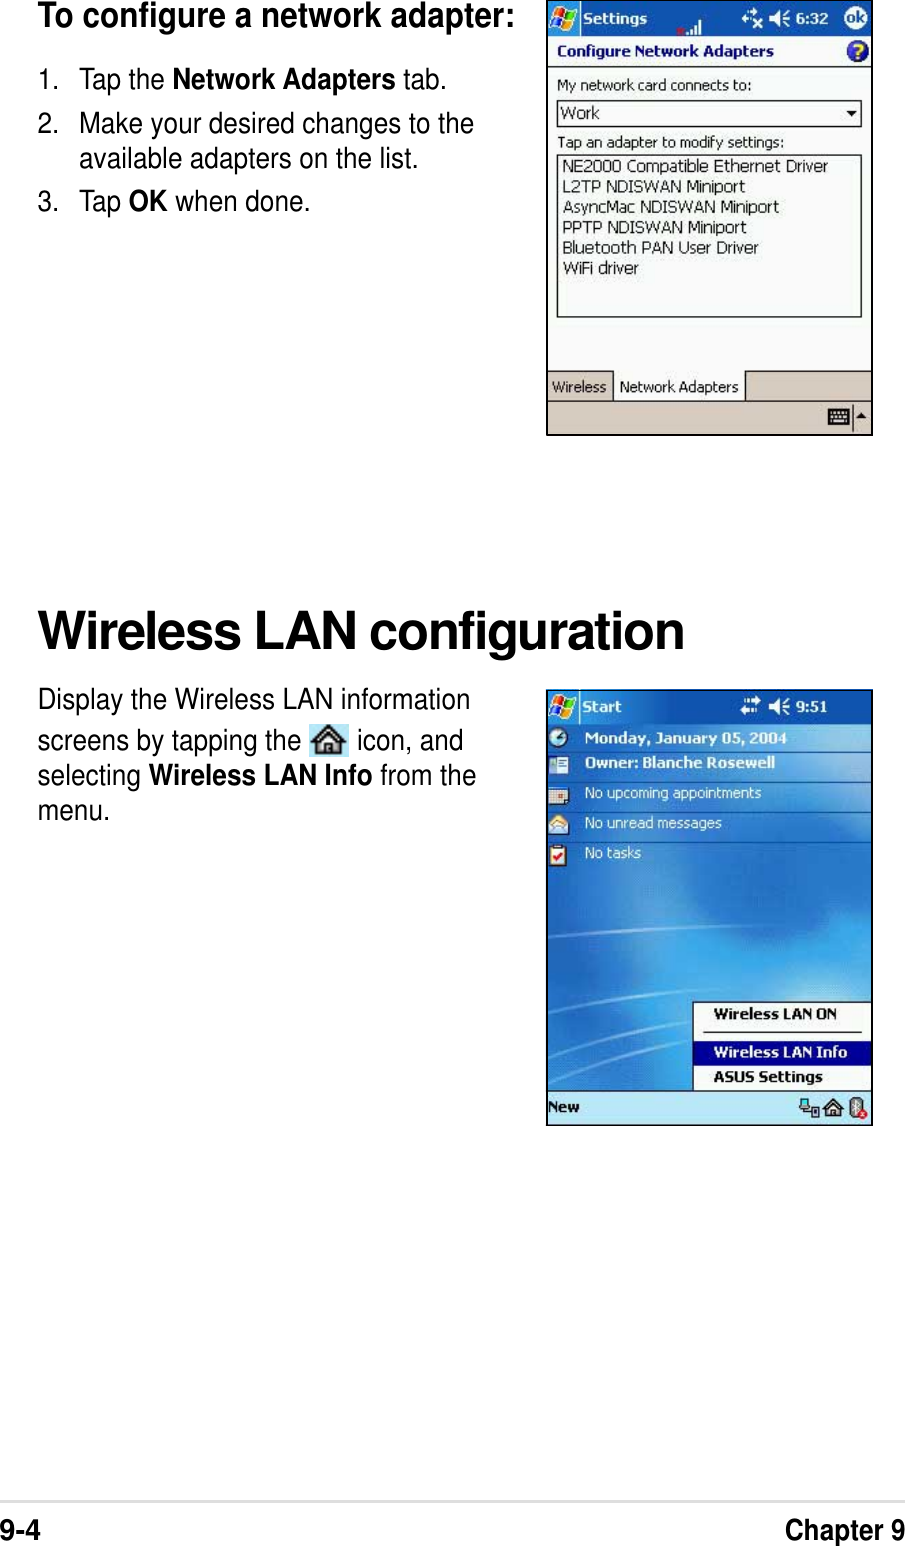 9-4Chapter 9Wireless LAN configurationDisplay the Wireless LAN informationscreens by tapping the   icon, andselecting Wireless LAN Info from themenu.To configure a network adapter:1. Tap the Network Adapters tab.2. Make your desired changes to theavailable adapters on the list.3. Tap OK when done.